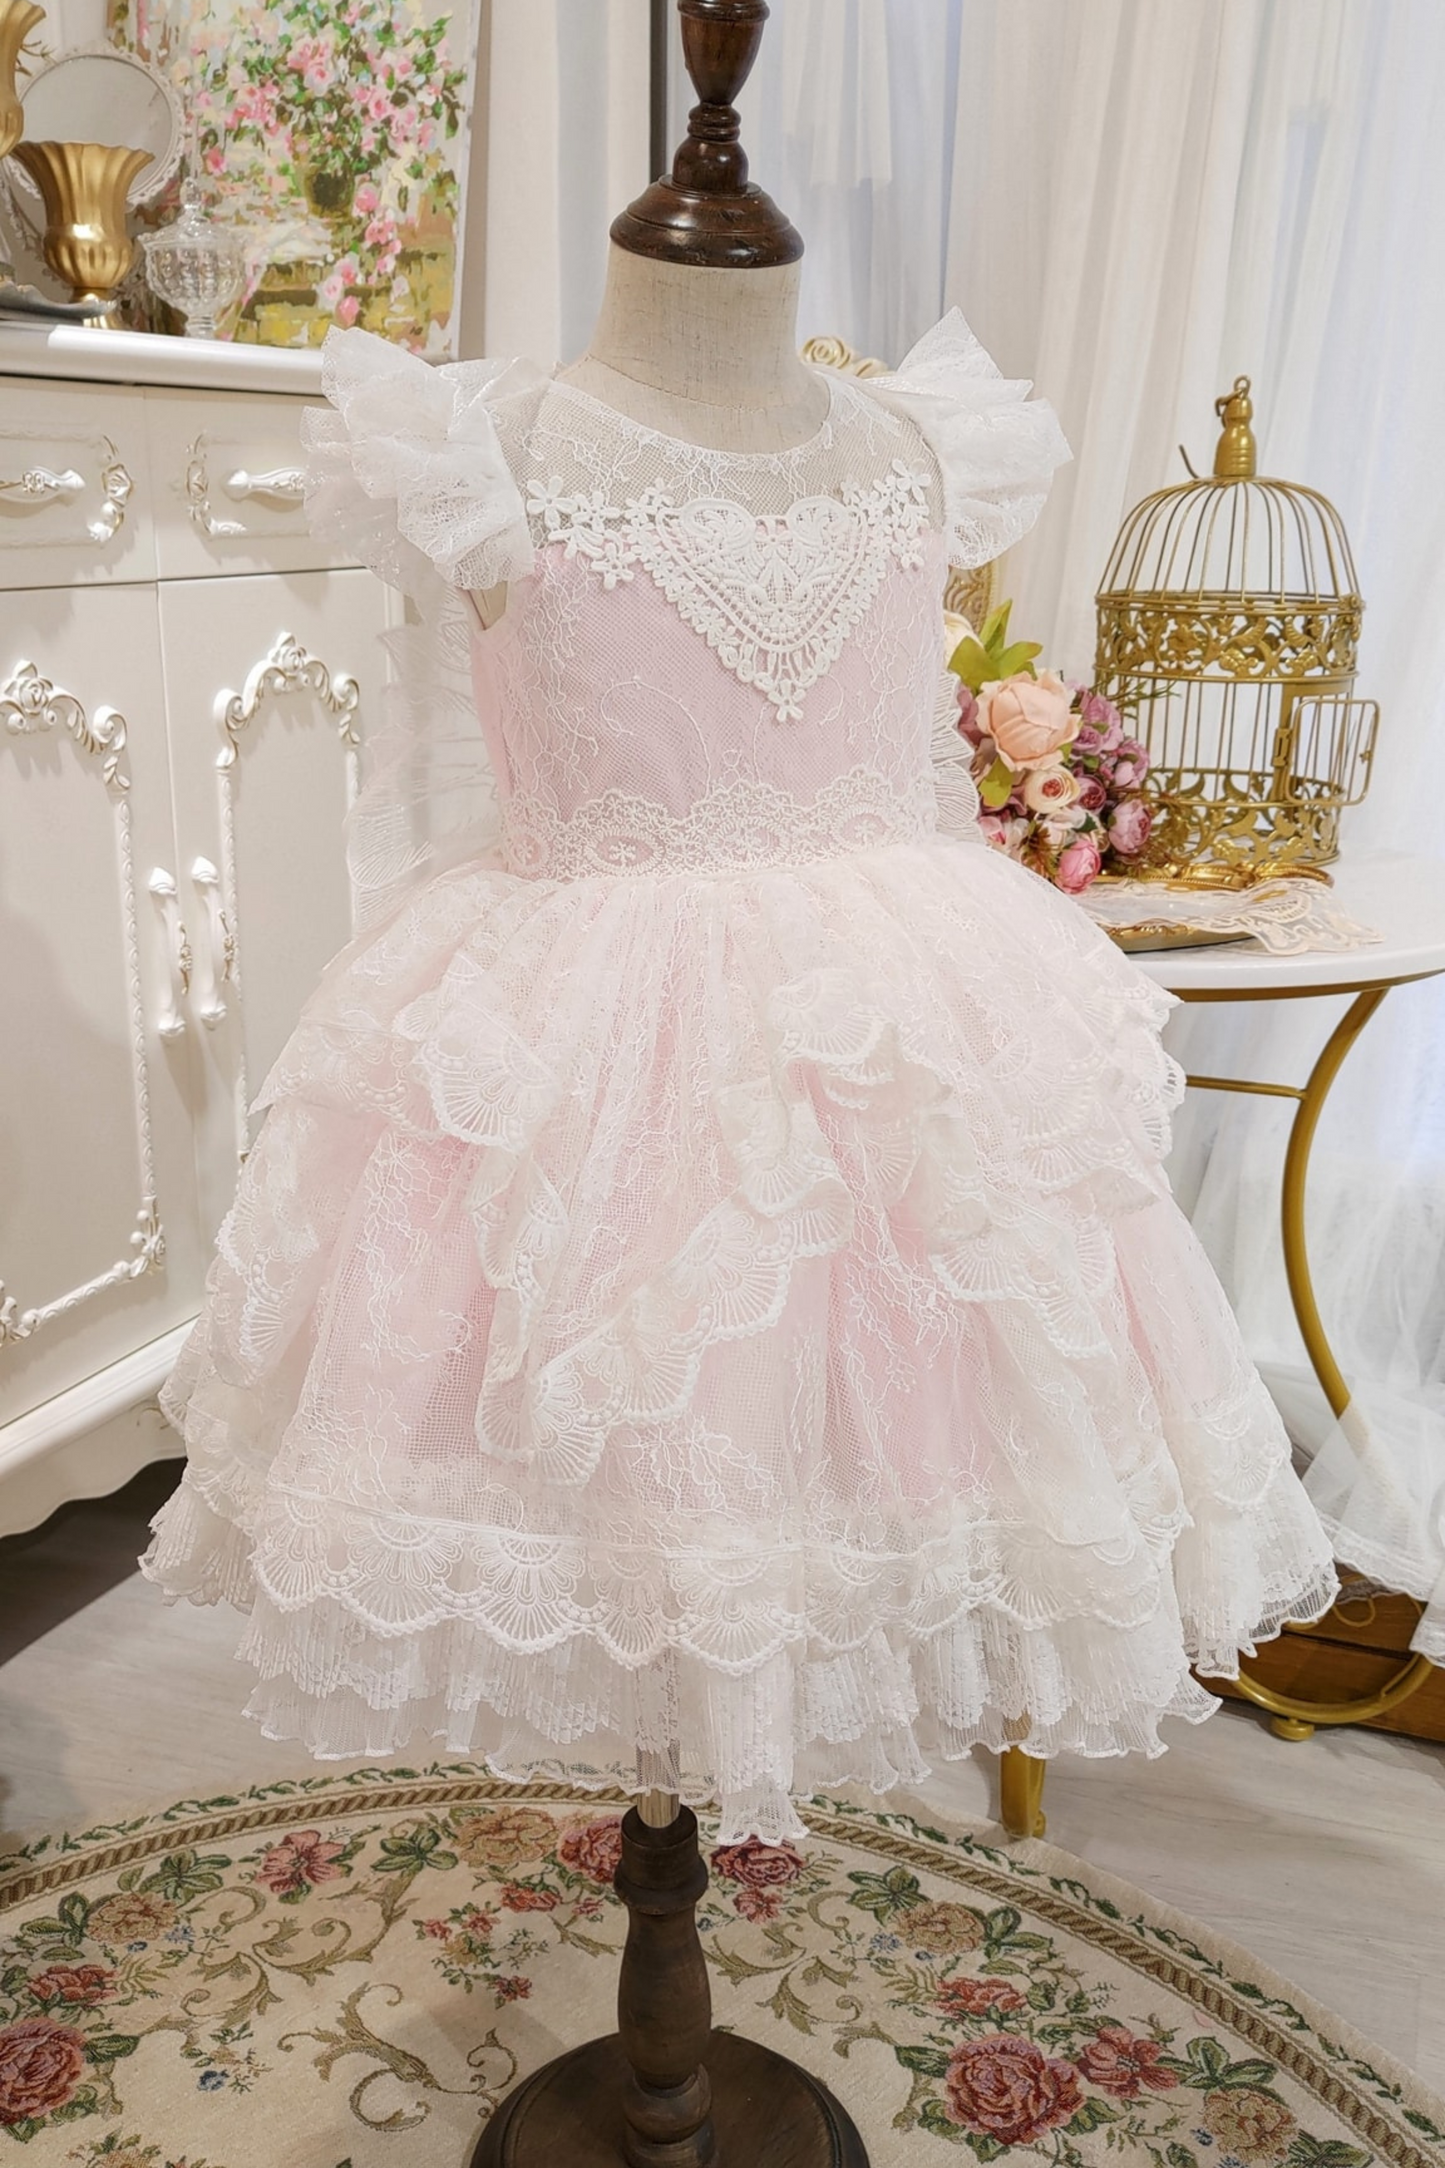 Winged Cupid Angel Lace Dress (Pink)